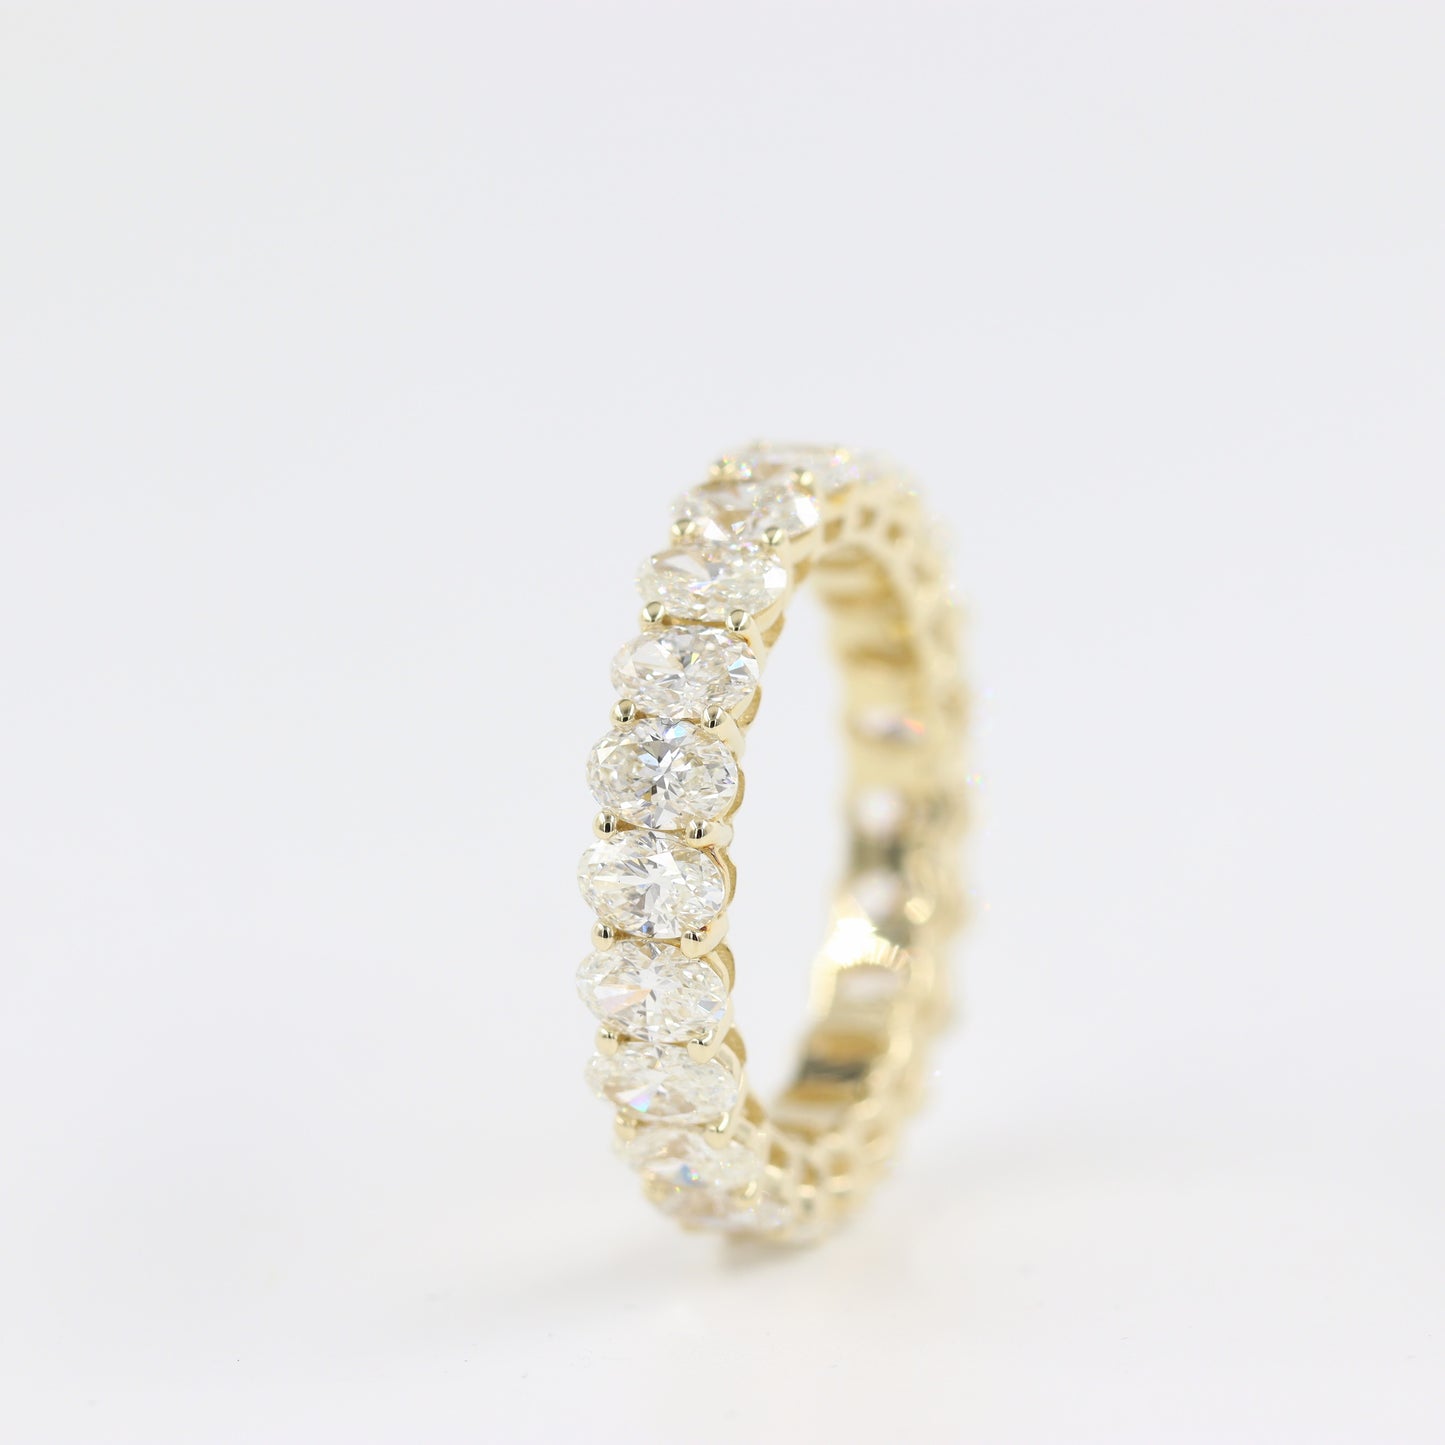 3.15ct Oval Diamond Ring/22stones Eternity Wedding Band/14K gold Oval Diamond Full Eternity Ring/ Wedding Ring/ Engagement Ring/Gift for her